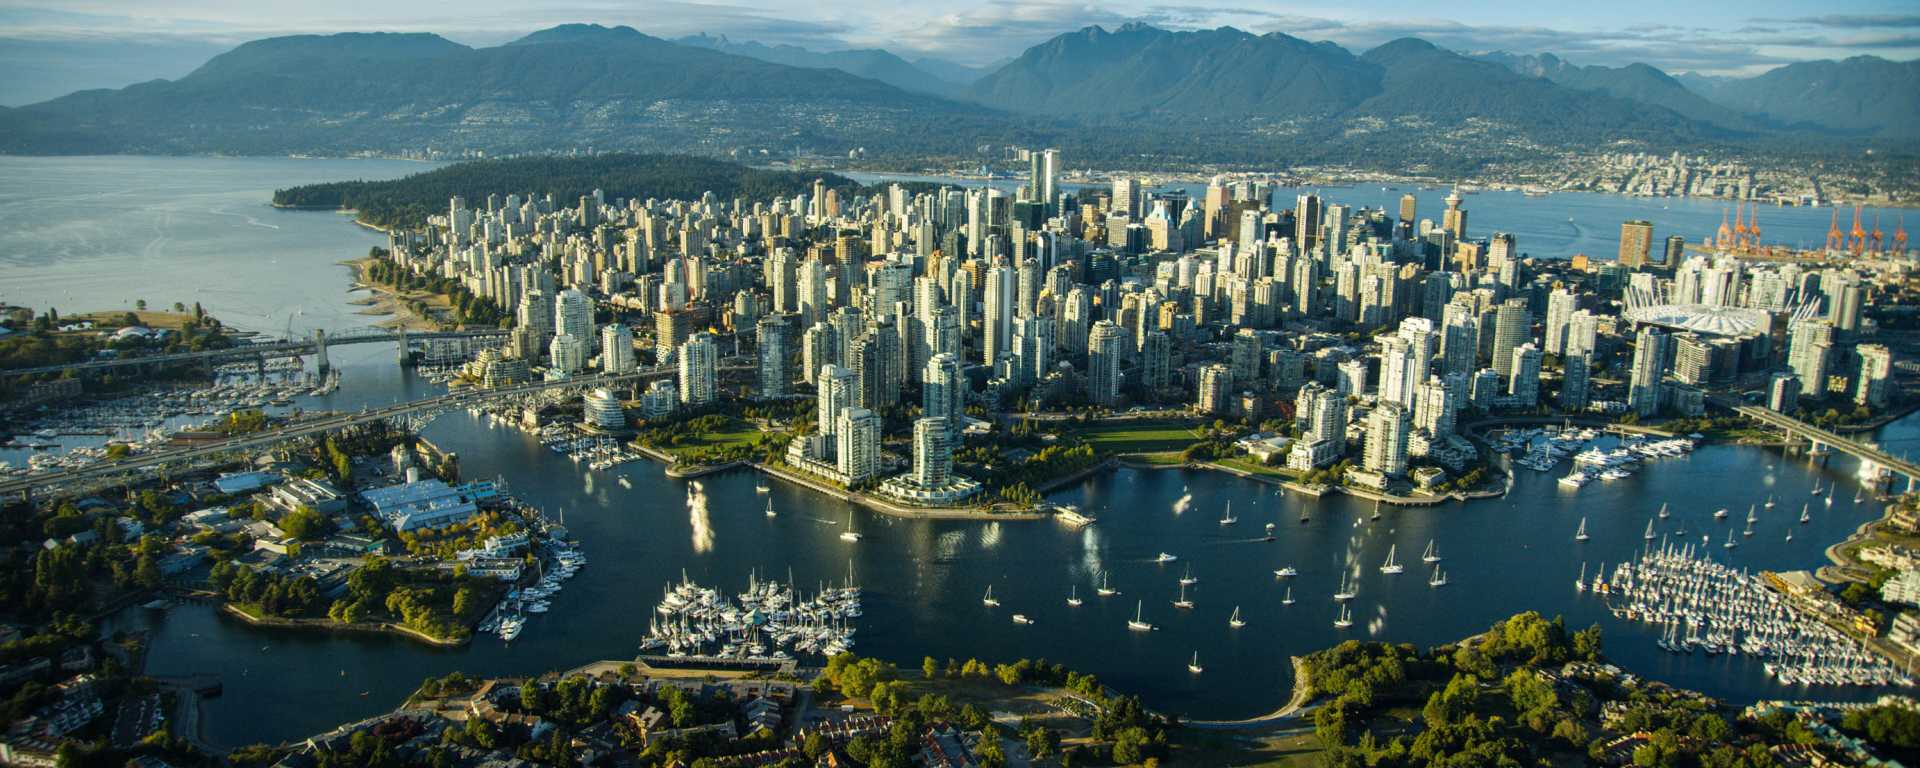 Top 7 Places to Visit in Vancouver as an International Student